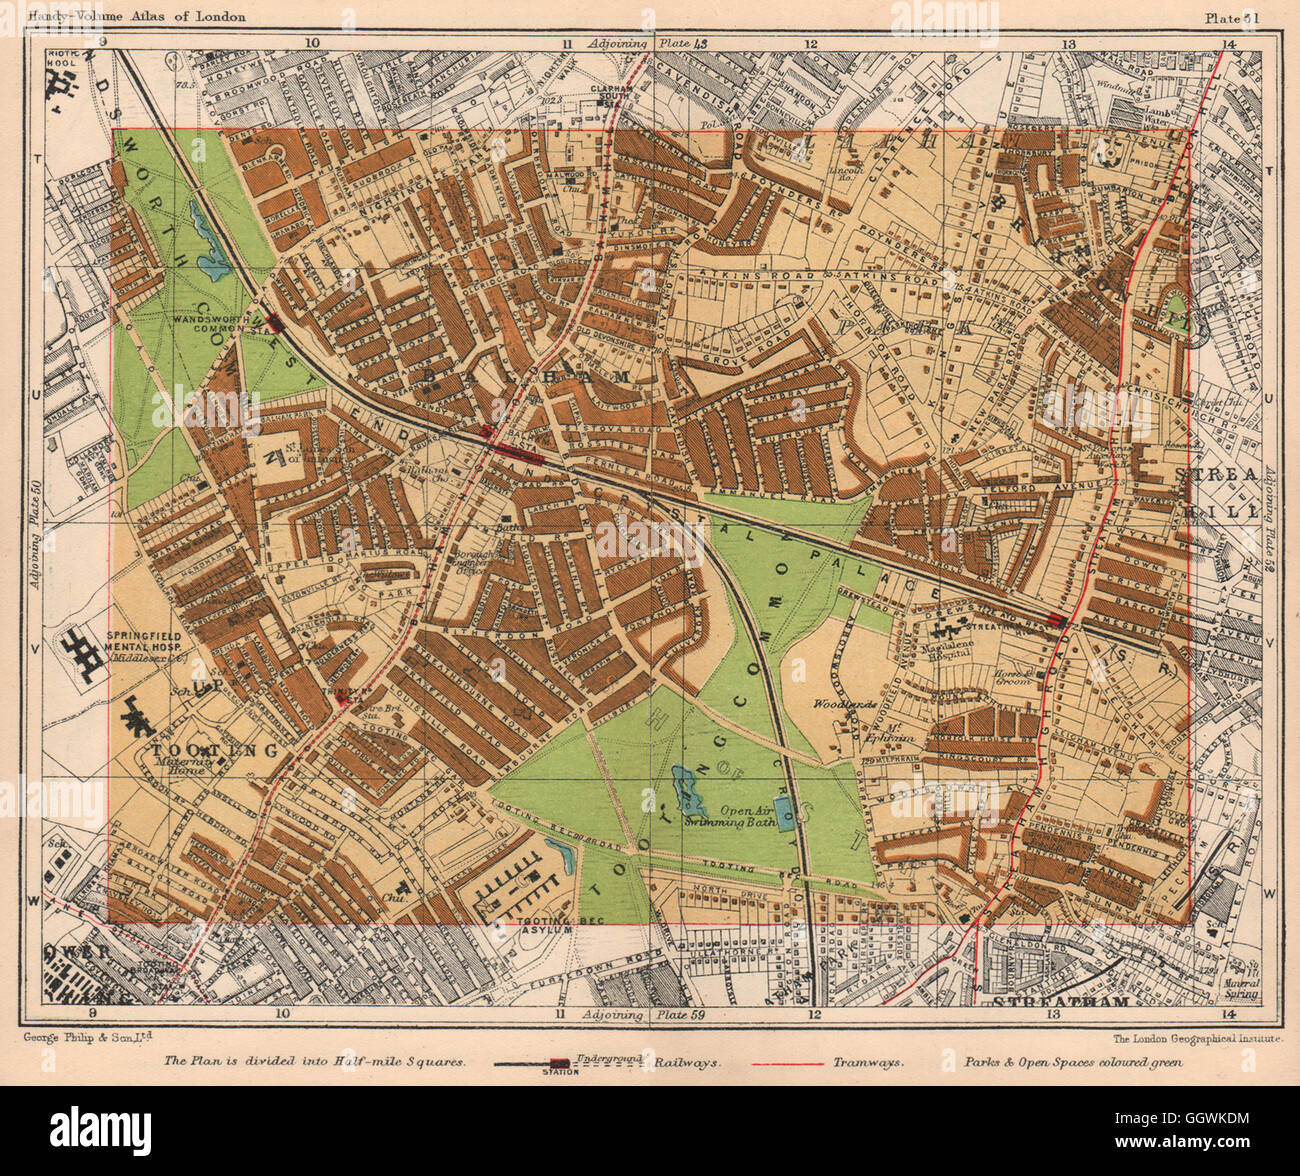 SW LONDON Balham Wandsworth Common Tooting Streatham Hill Brixton Hill, 1932 map Stock Photo